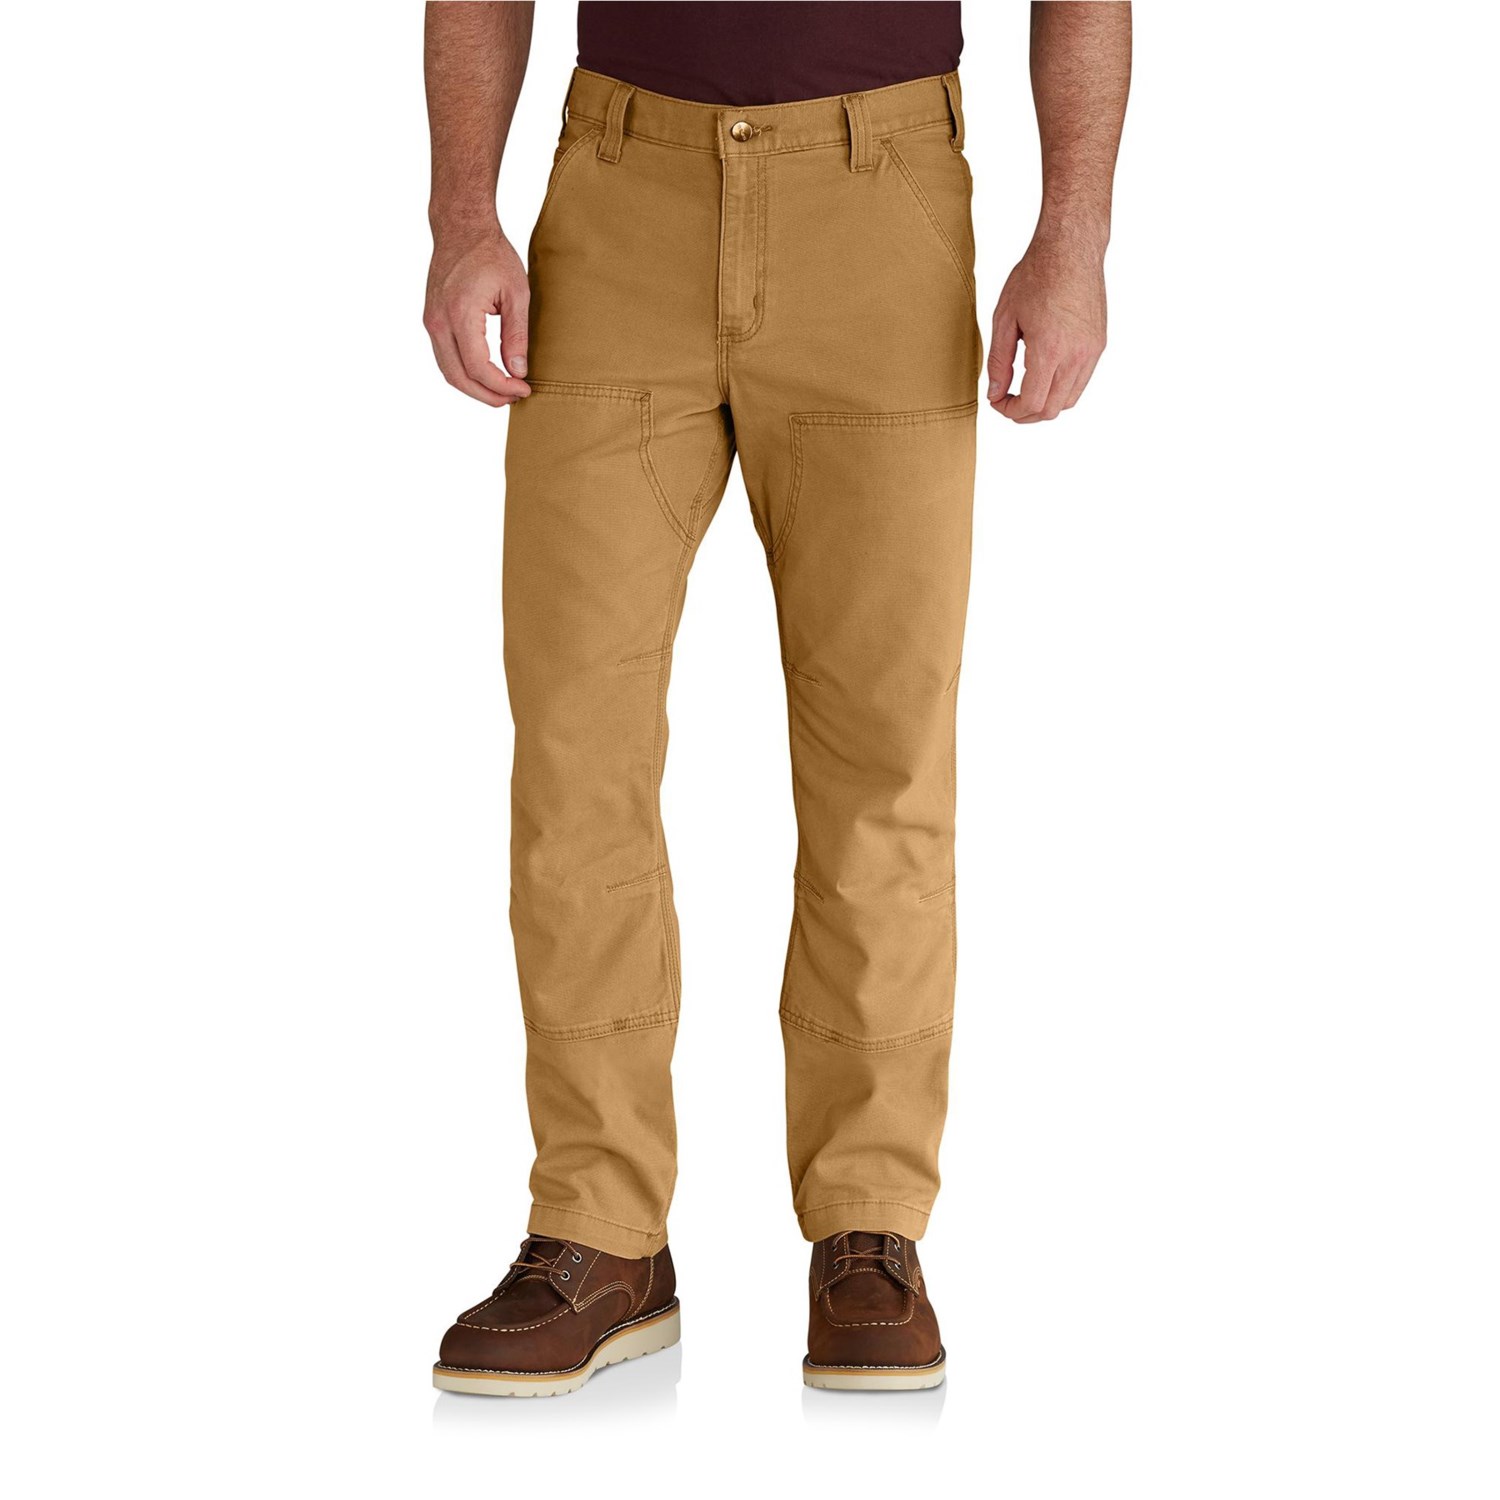 https://i.stpost.com/carhartt-102802-rugged-flex-rigby-double-front-pants-factory-seconds-in-hickory~p~1acpy_04~1500.3.jpg